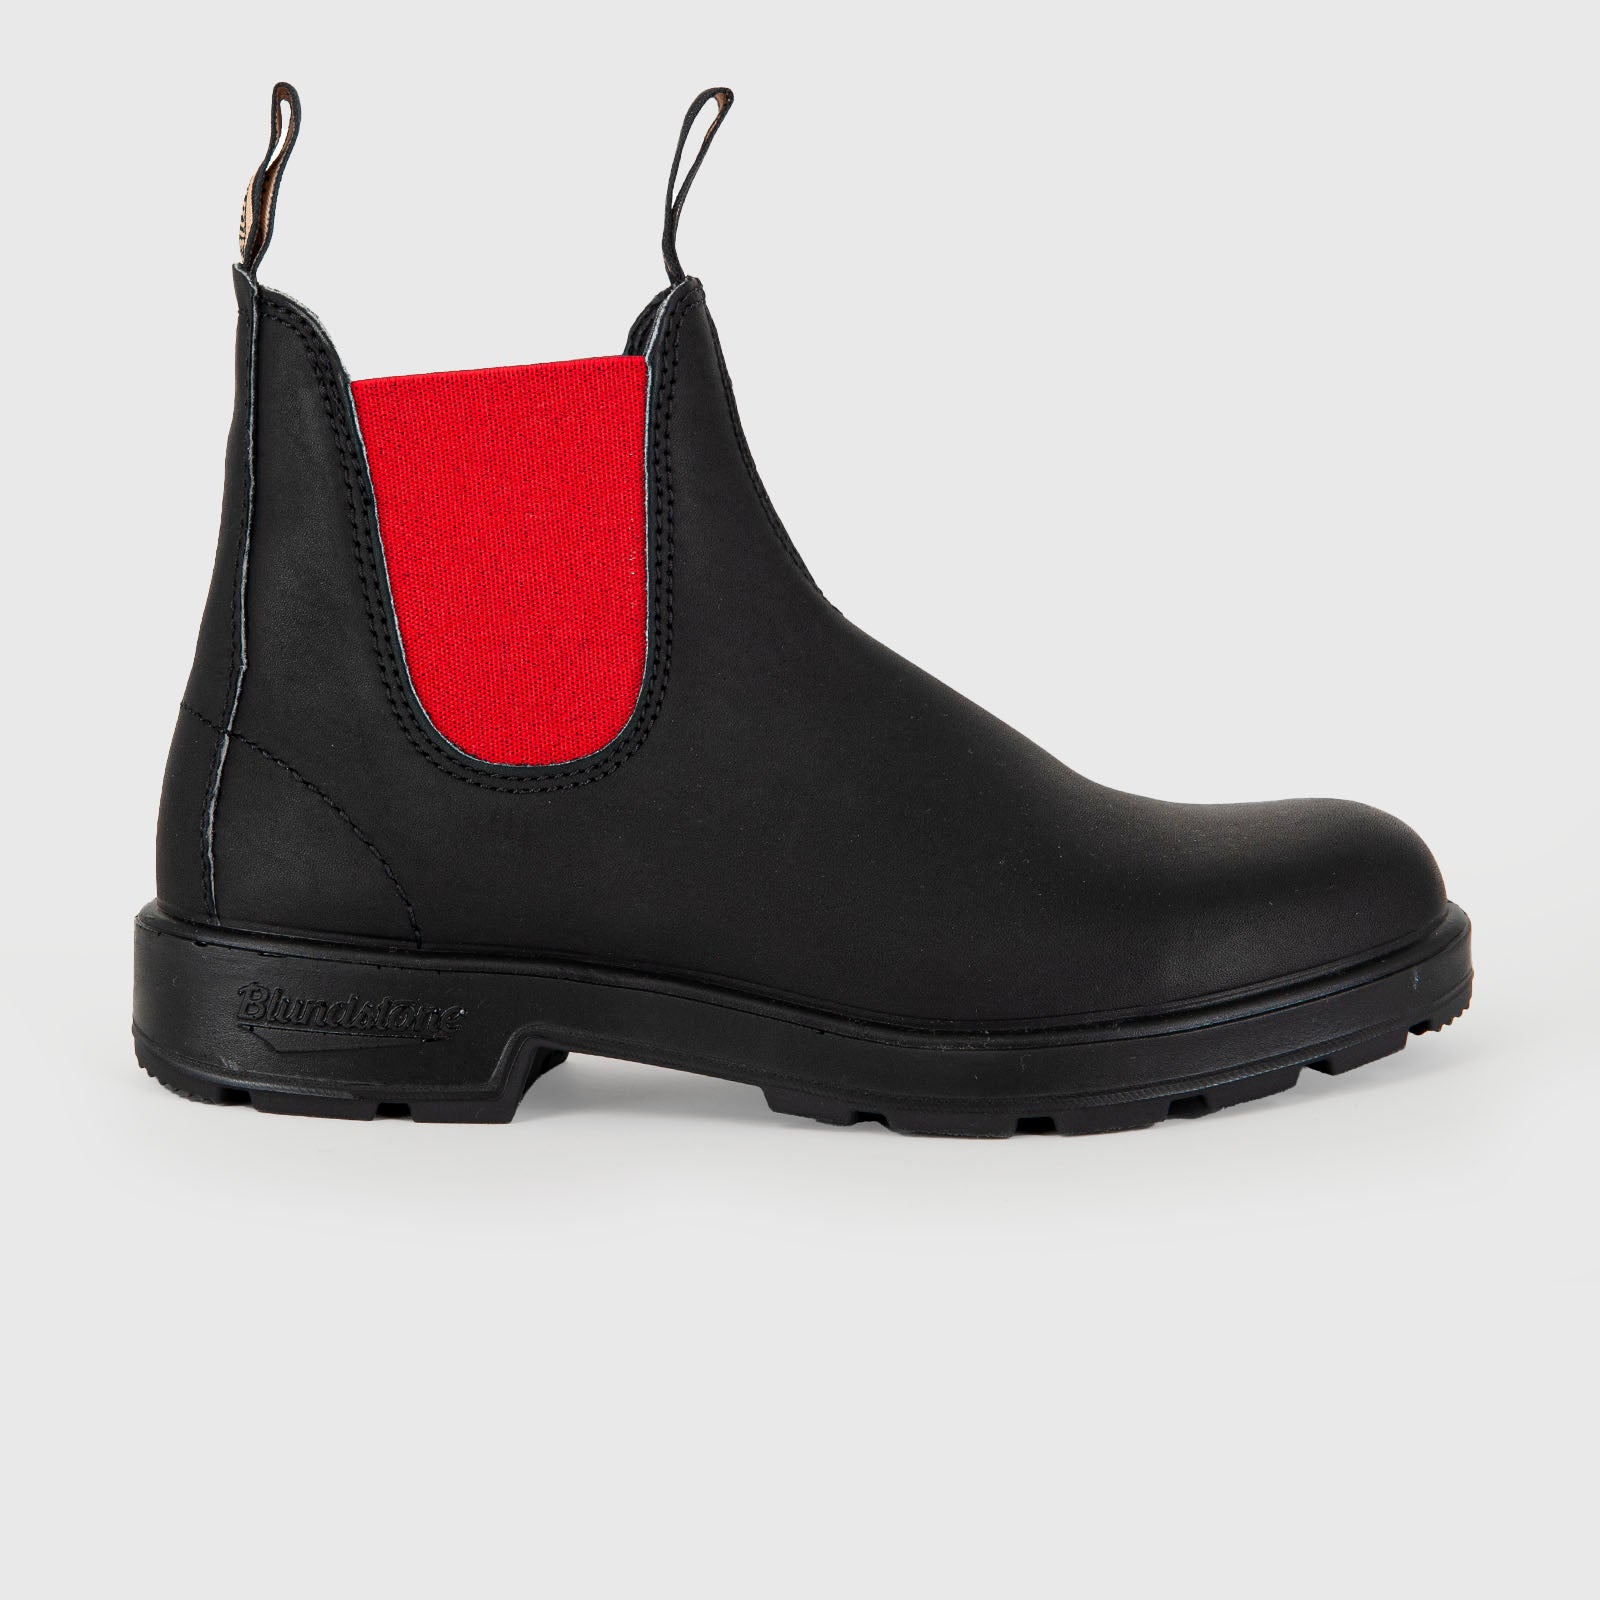 Blundstone Beatle Ankle Boot 508 Leather Black/Red - 8